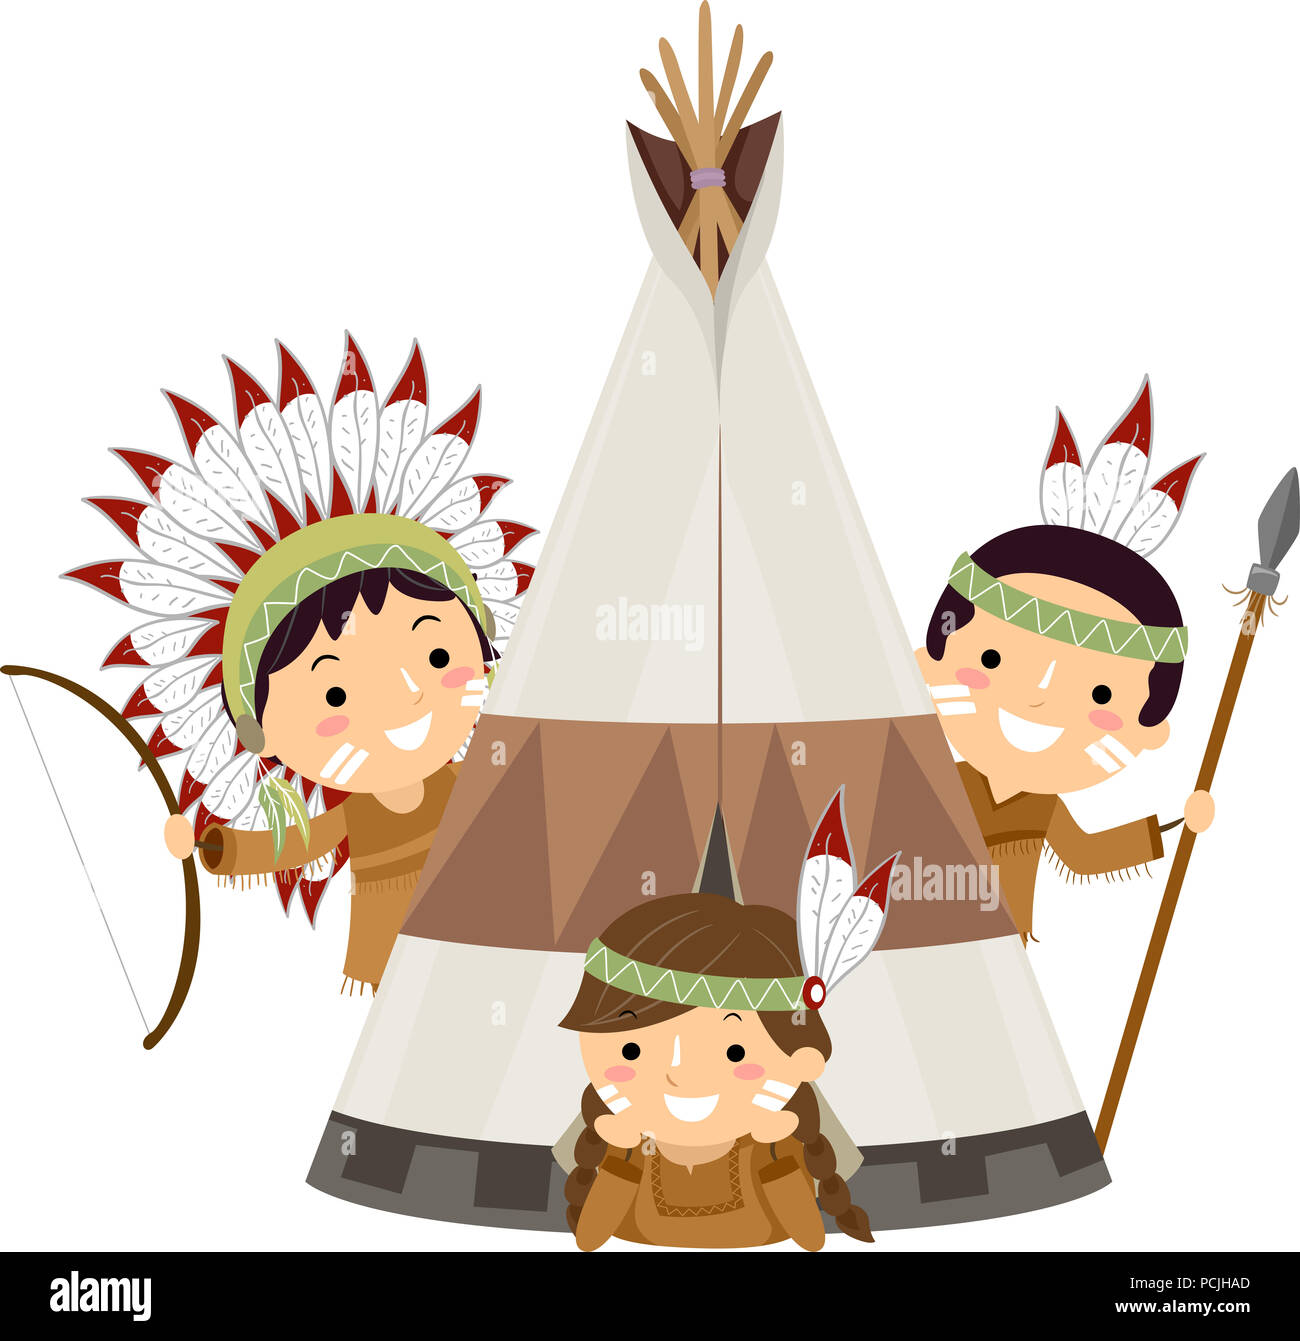 Illustration of Native American Indian Kids with Bow, Arrow, Spear and a Tent Stock Photo